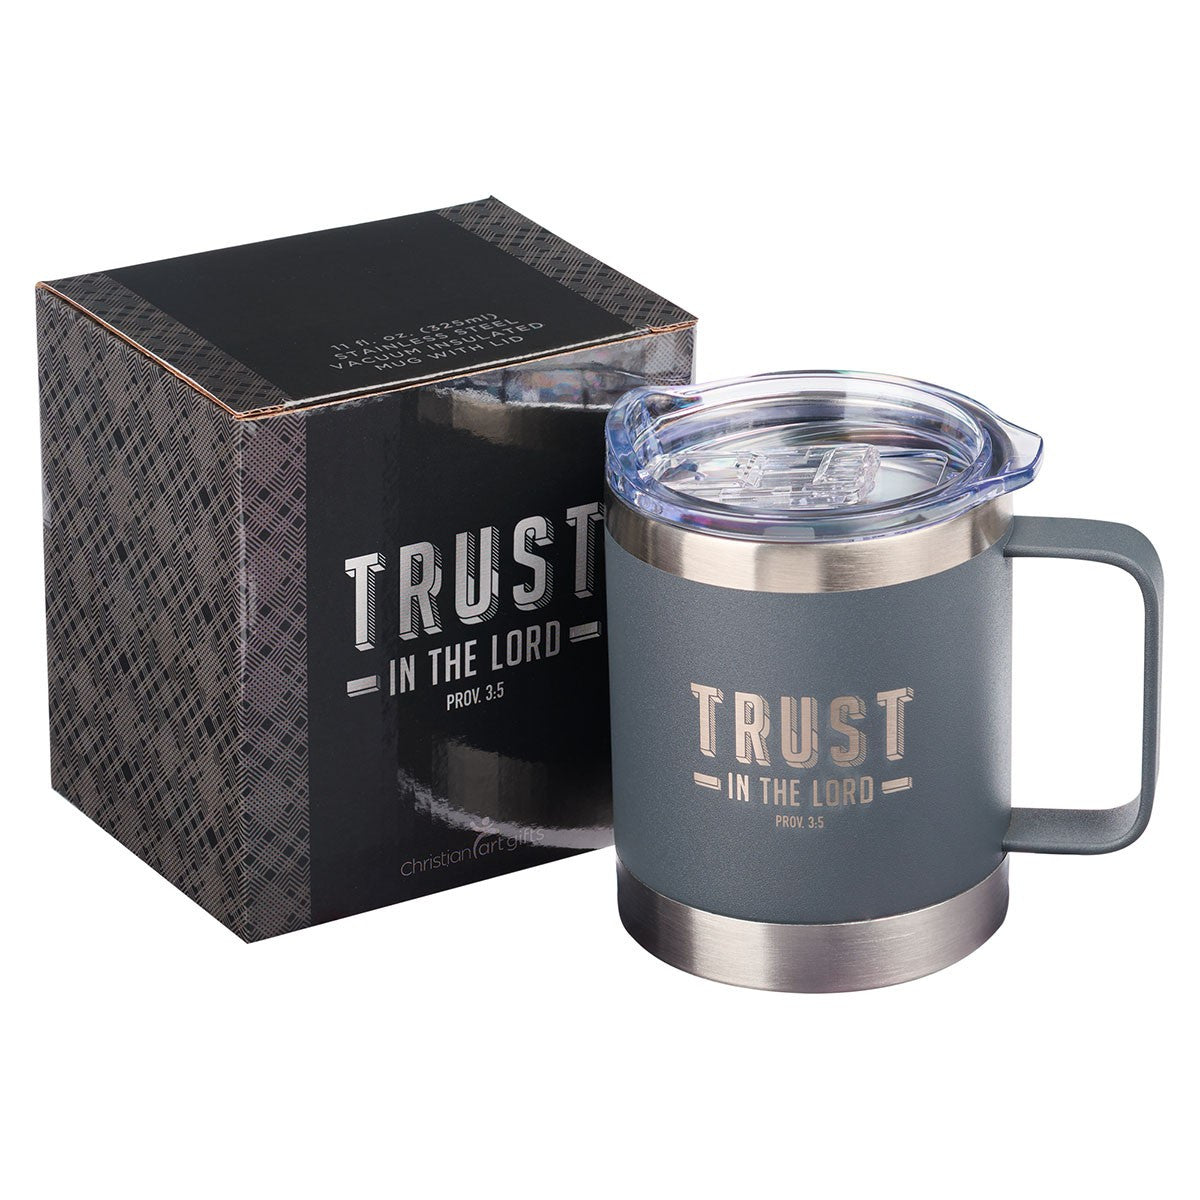 Trust the LORD Camp Style Stainless Steel Mug - Proverbs 3:5